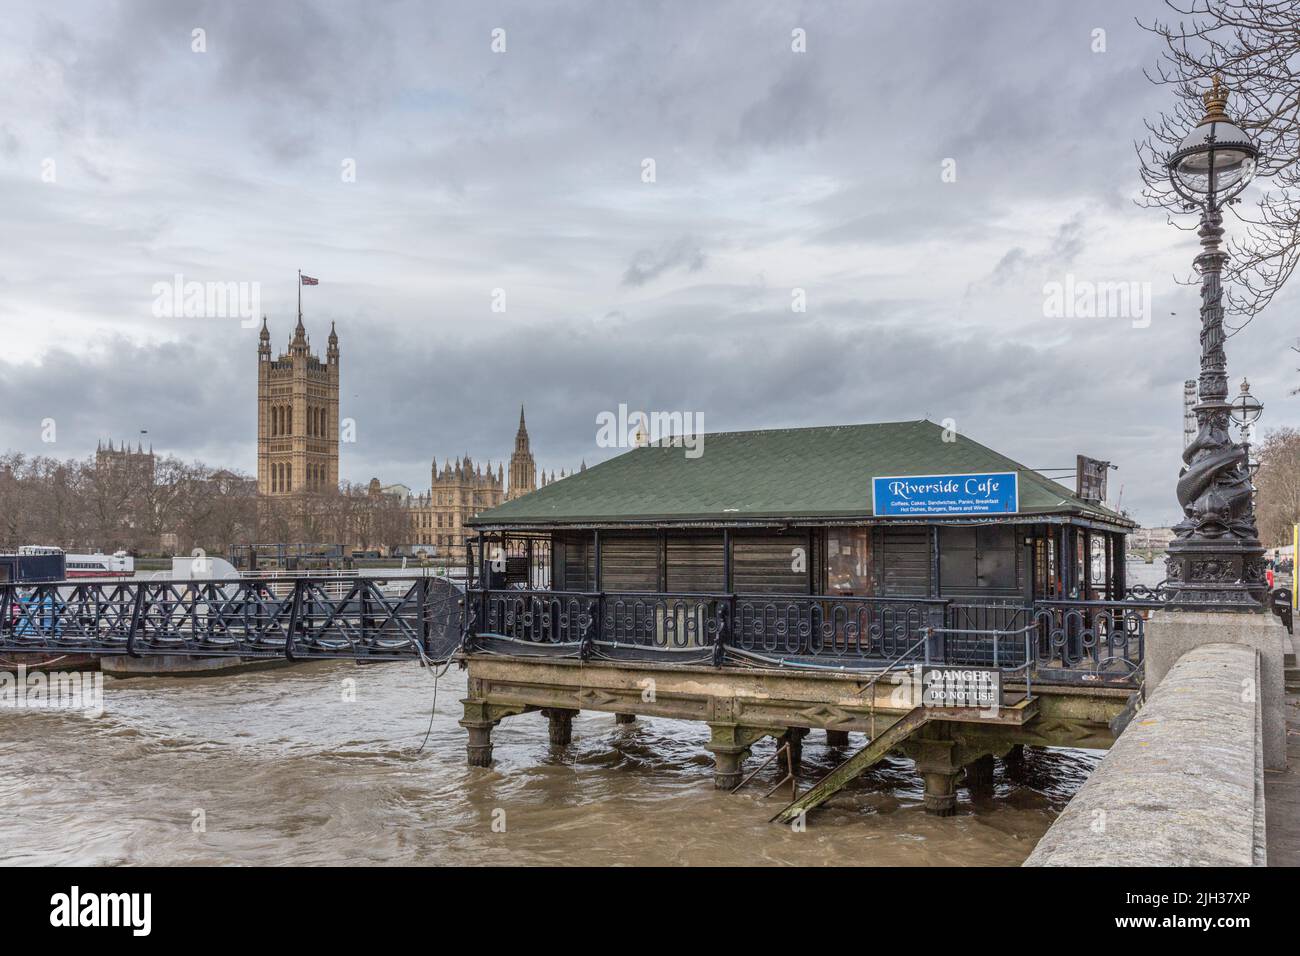 Riverside Cafe and the Houses of Parliament, London, UK Stock Photo